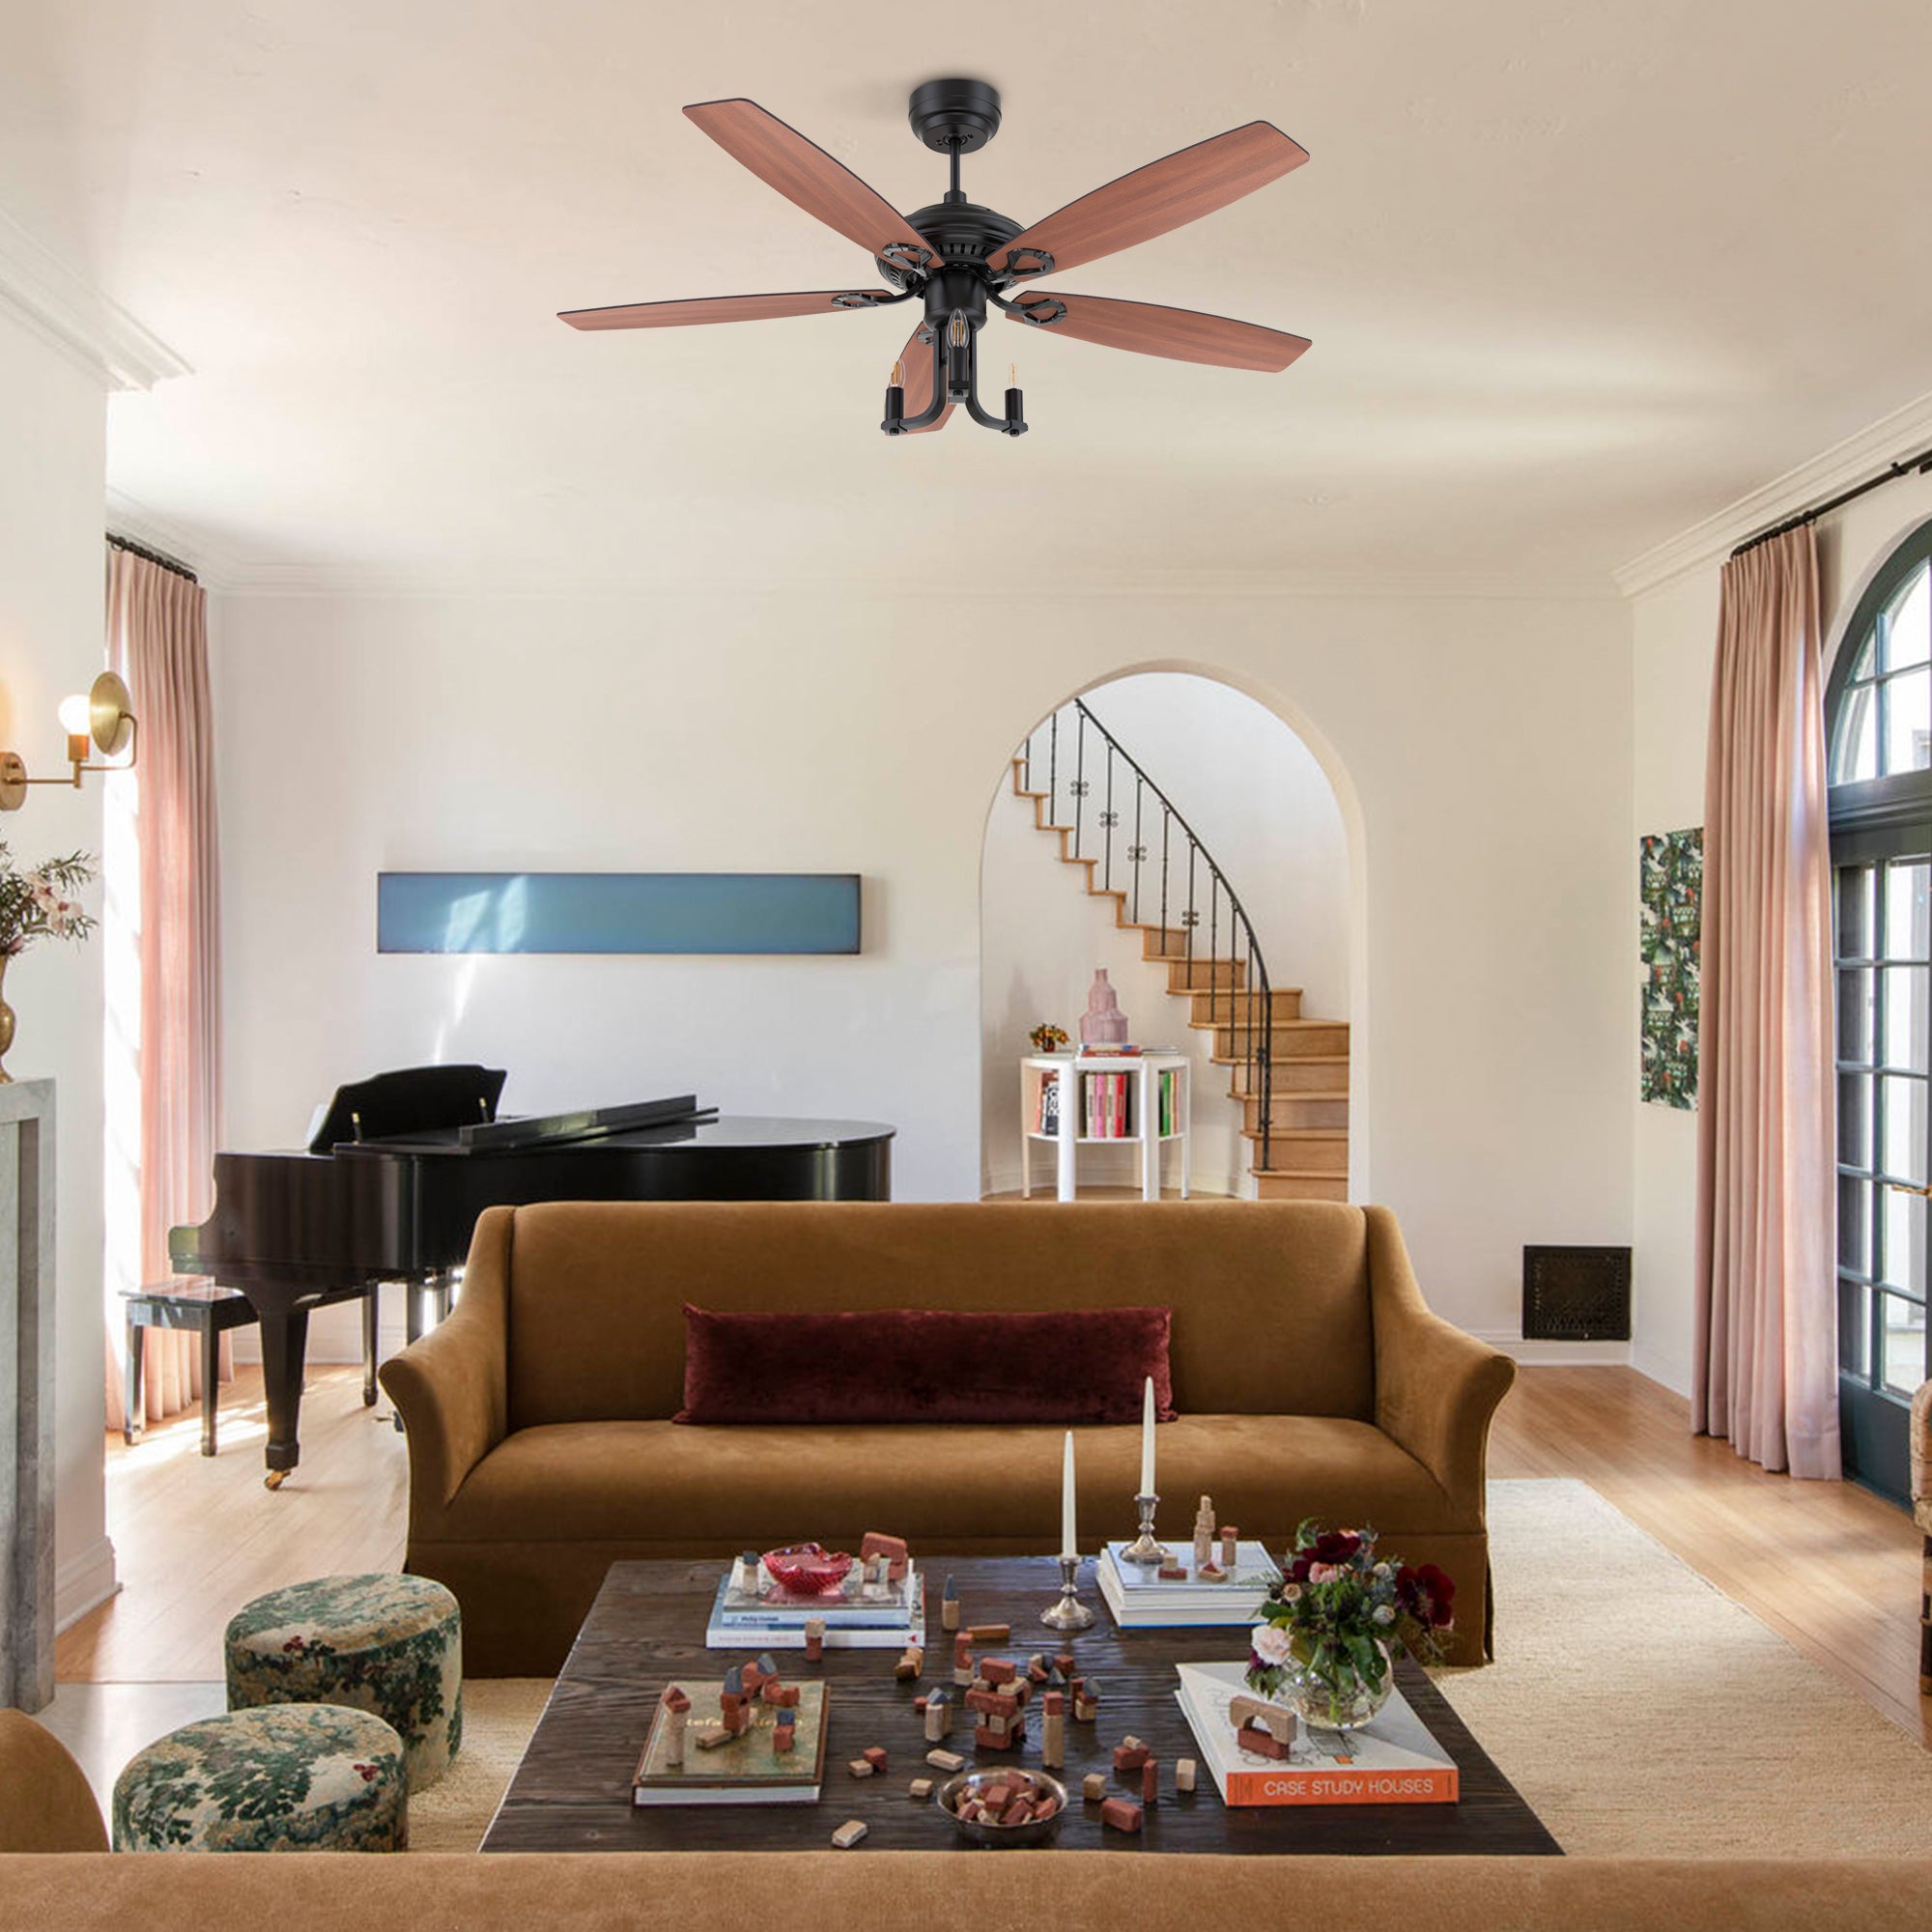 This Bryson 52&#39;&#39;ceiling fan keeps your space cool, bright, and stylish. It is a soft modern masterpiece perfect for your large indoor living spaces. This ceiling fan is a simplicity designing with black finish, use elegant Plywood blades and compatible with LED bulb(Not included). The fan features remote control. 